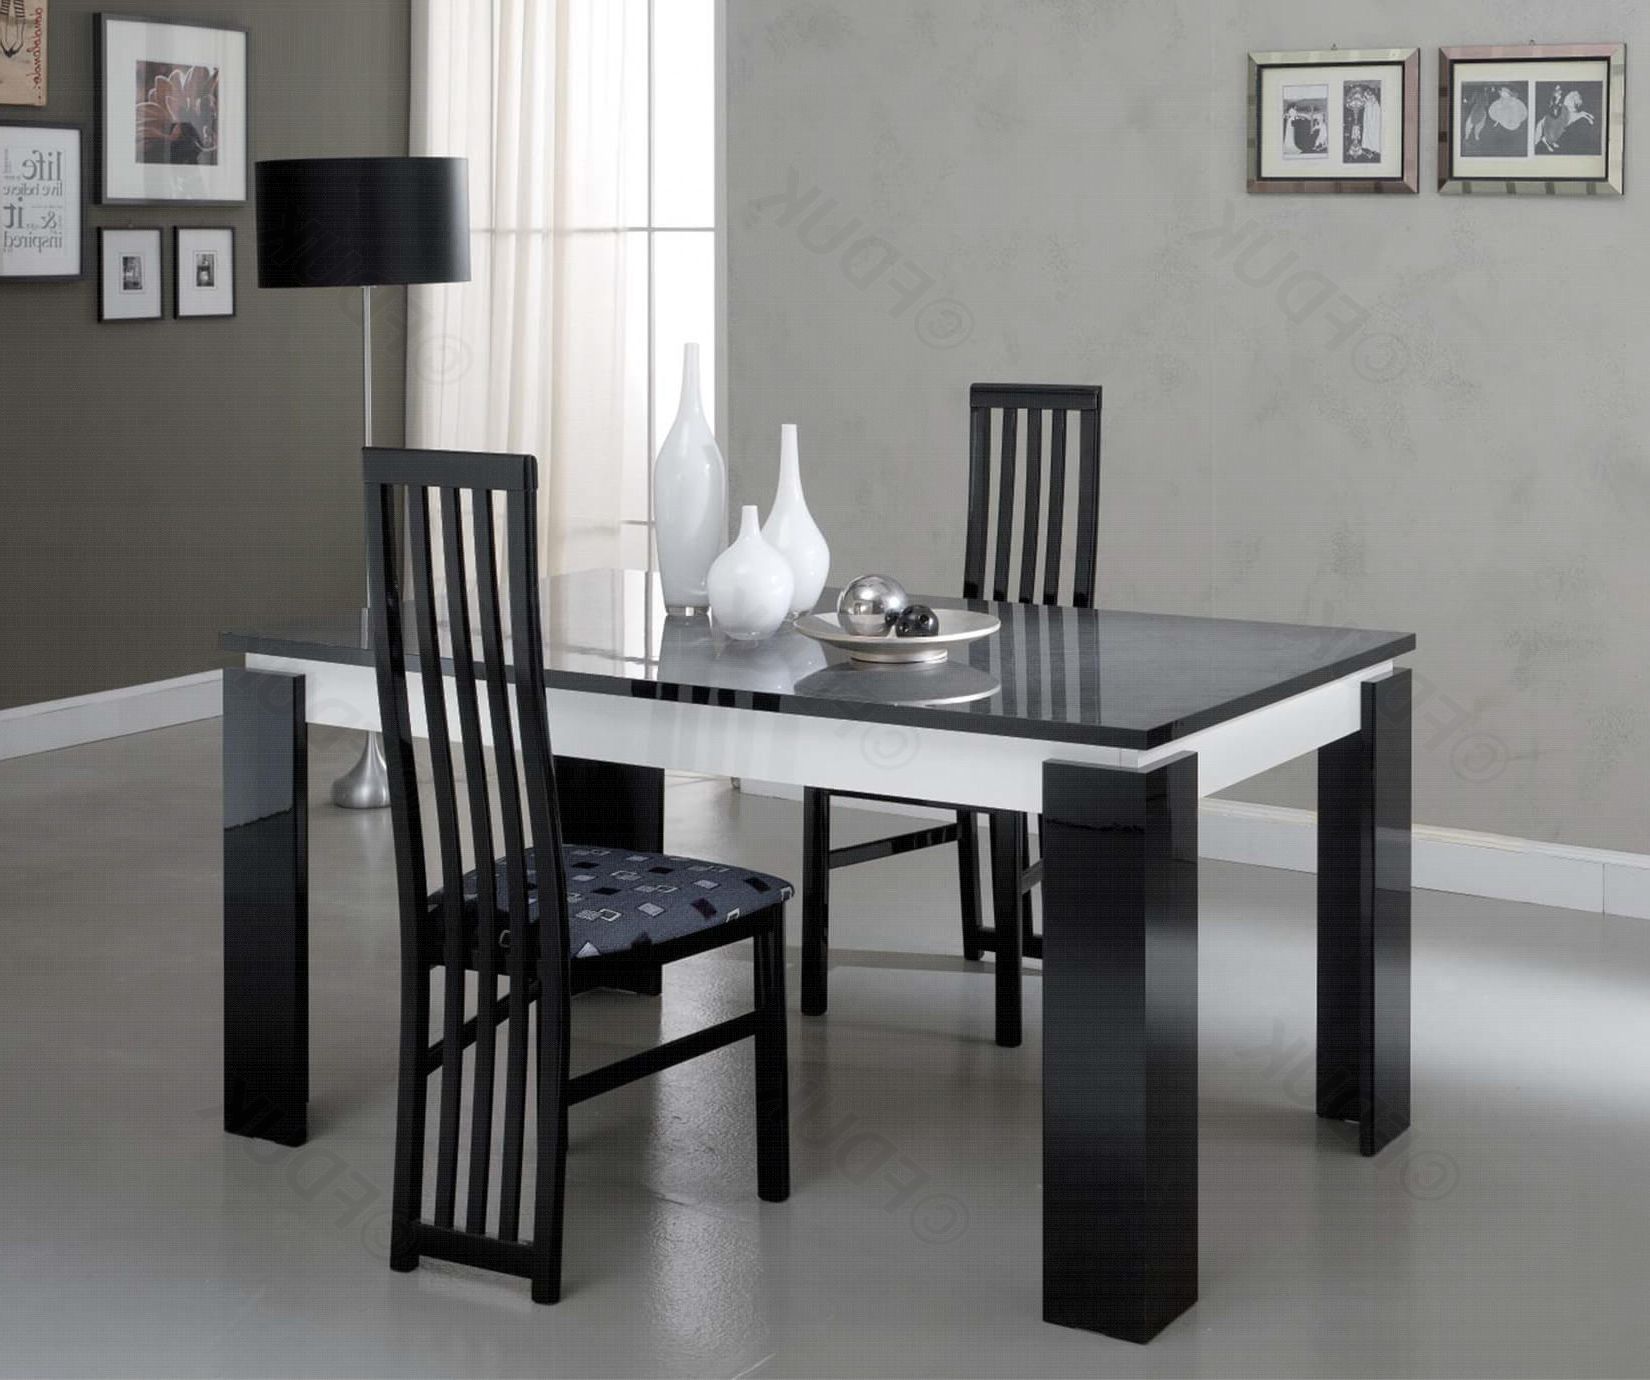 San Martino Polaris Dining Table With 4 Chairs Inside Most Current Martino Dining Tables (View 5 of 25)